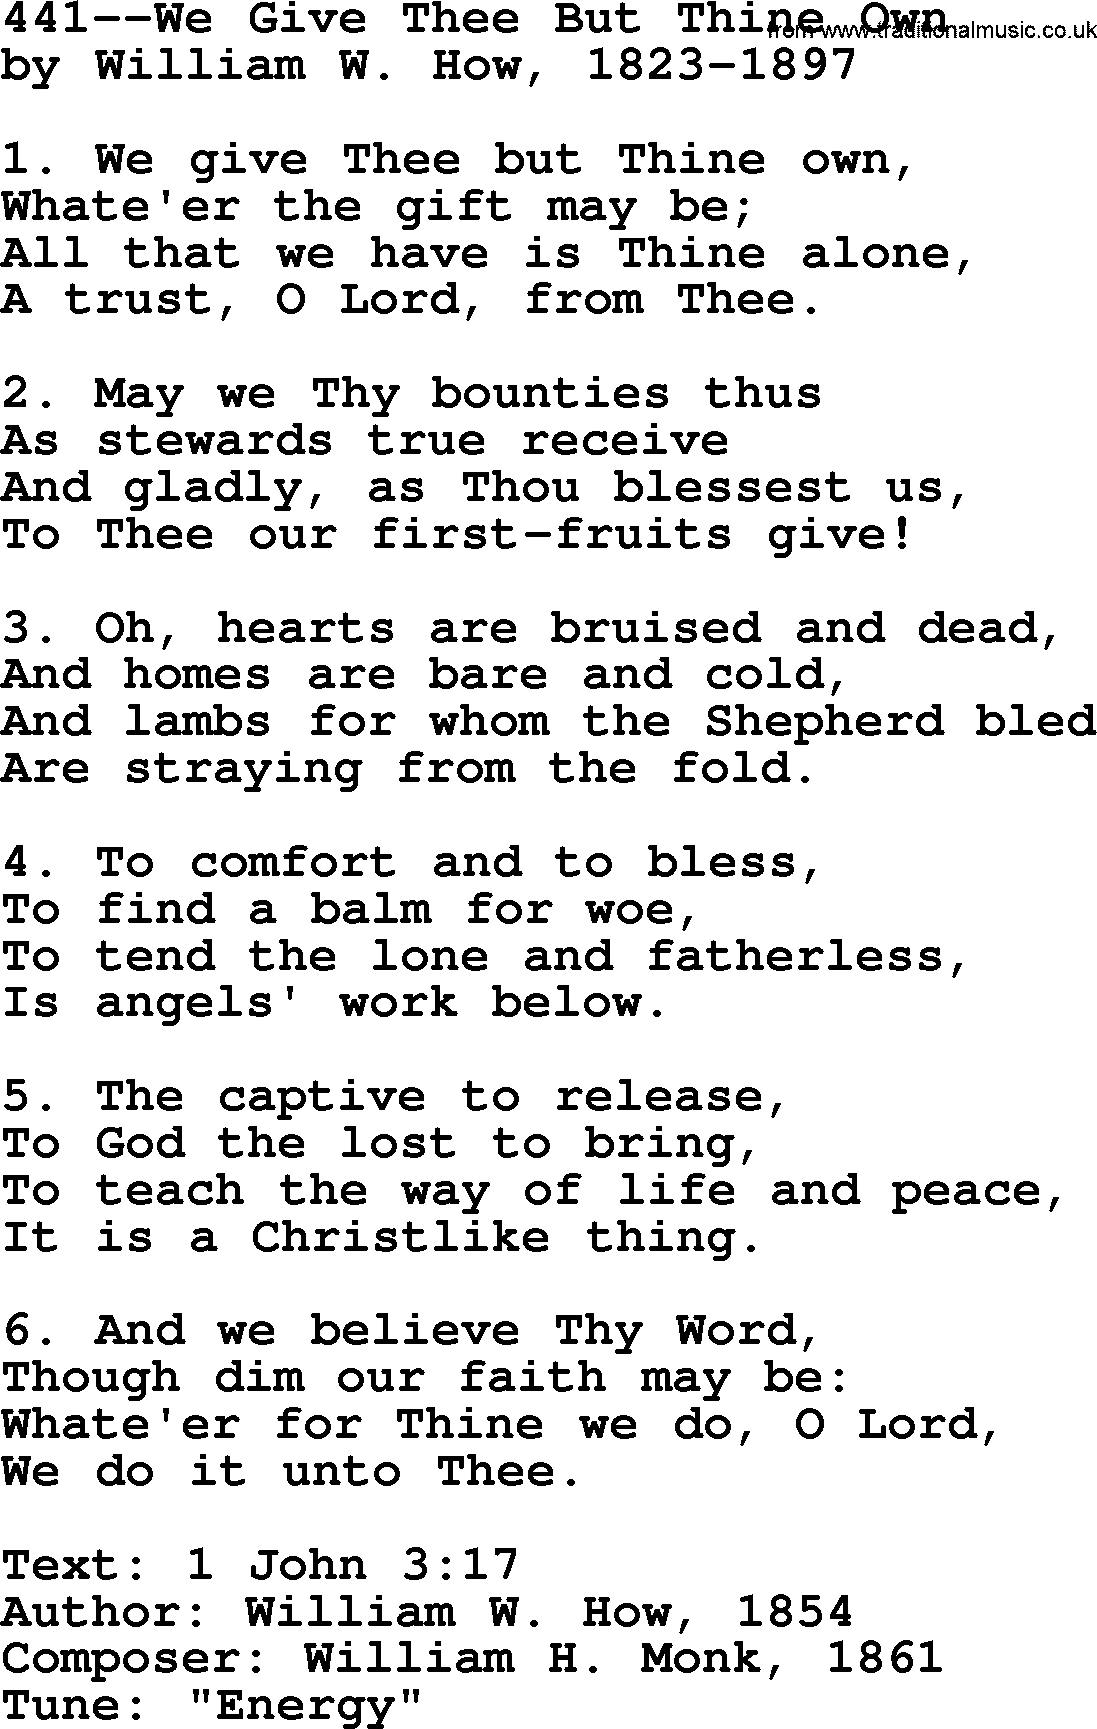 Lutheran Hymn: 441--We Give Thee But Thine Own.txt lyrics with PDF